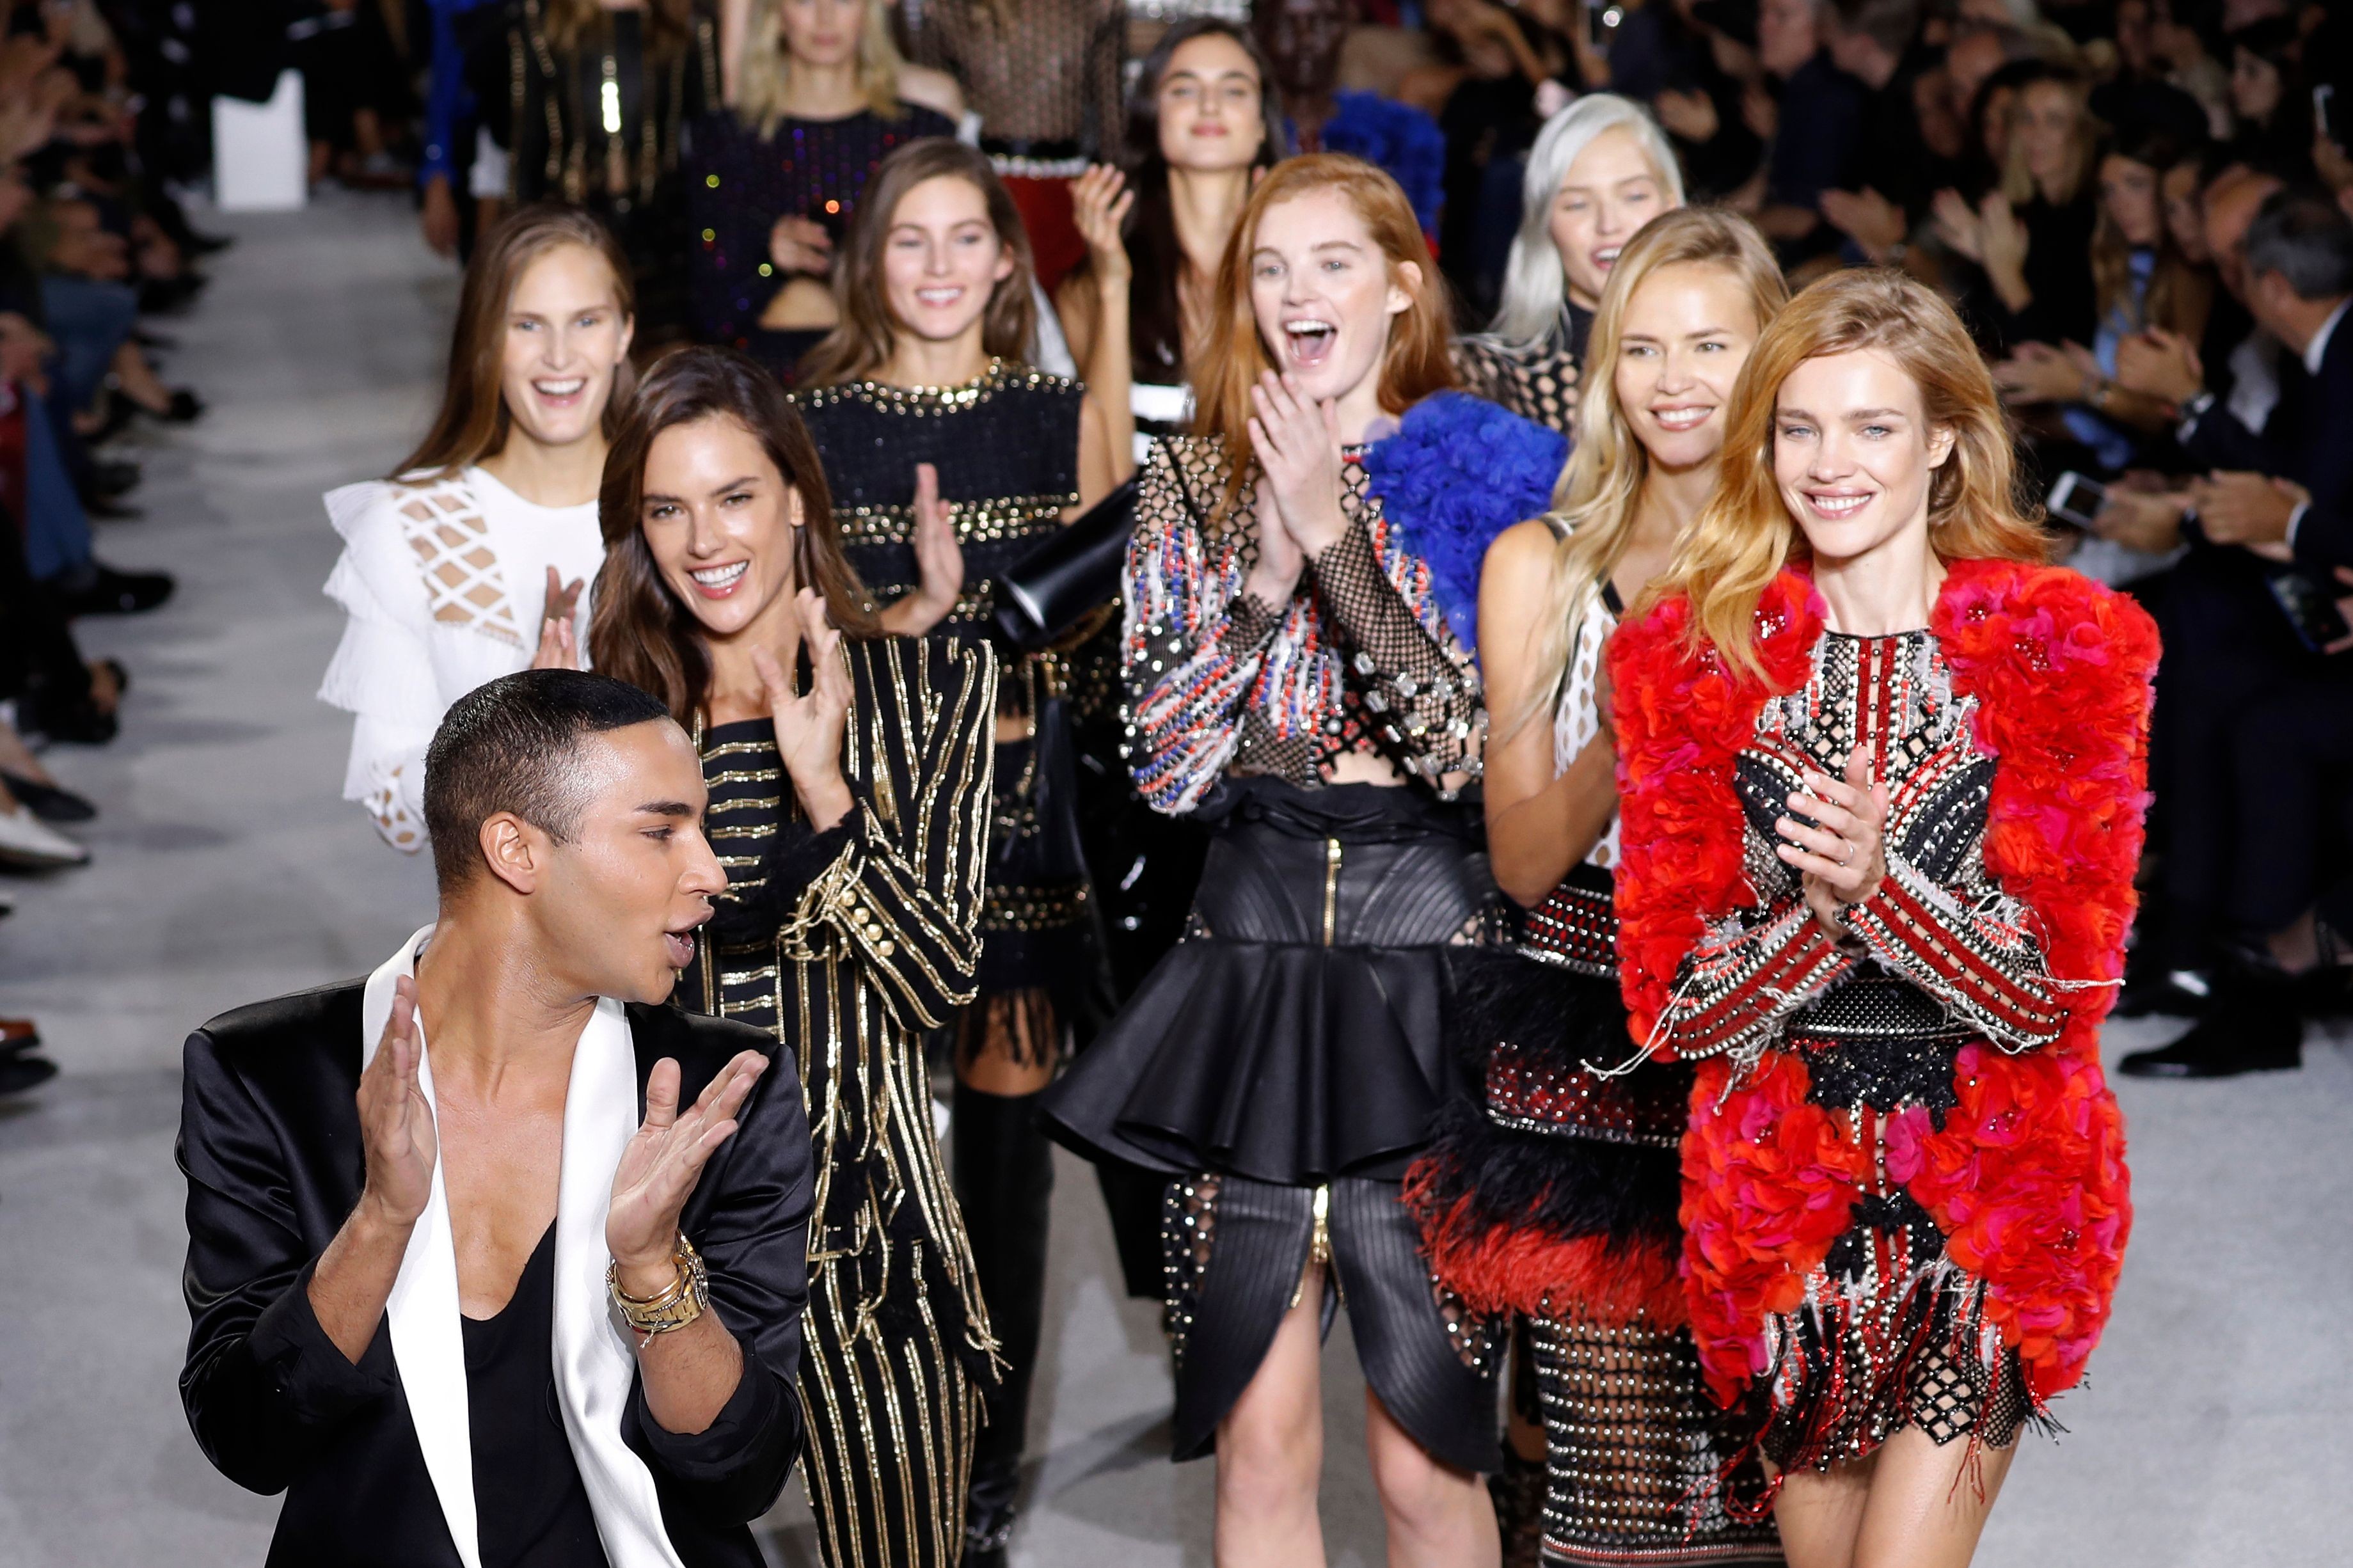 Models Alessandra Ambrosio, Natalia Vodianova, Natasha Poly present creations as Olivier Rousteing acknowledges the audience at the end of Balmain women's 2018 spring/summer ready-to-wear collection fashion show in Paris. Photo: AFP